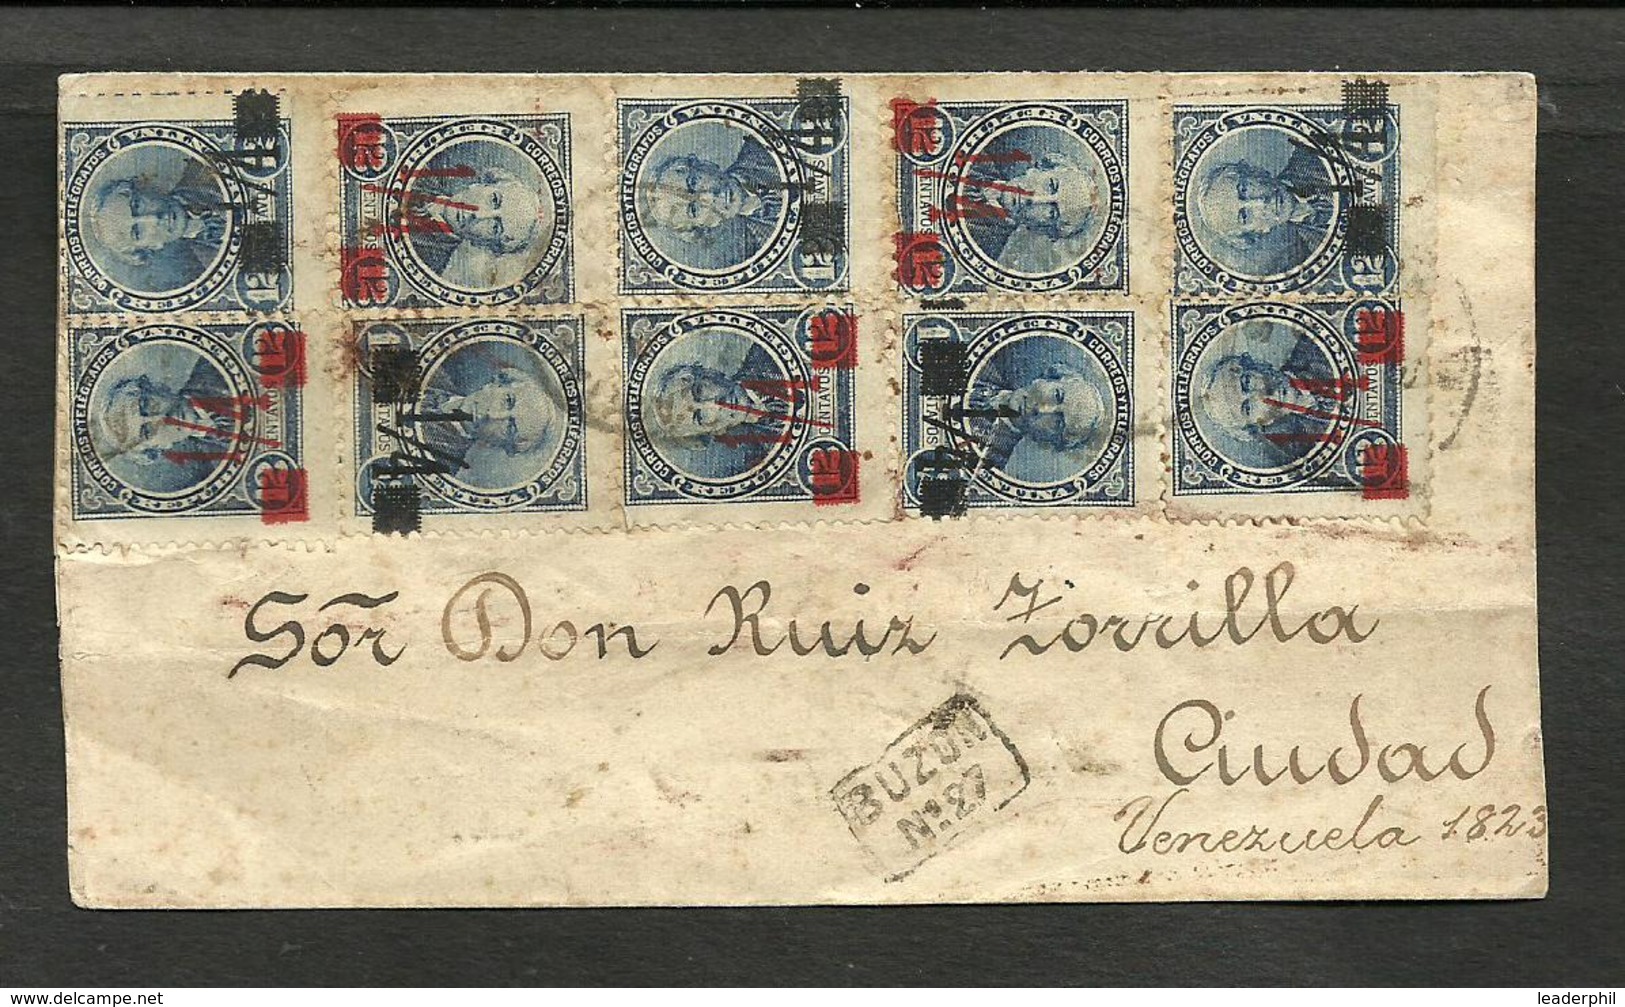 ARGENTINA 1890 COVER W/ BUZON 27 BUENOS AIRES CANCEL, GOOD POSTAGE - Covers & Documents